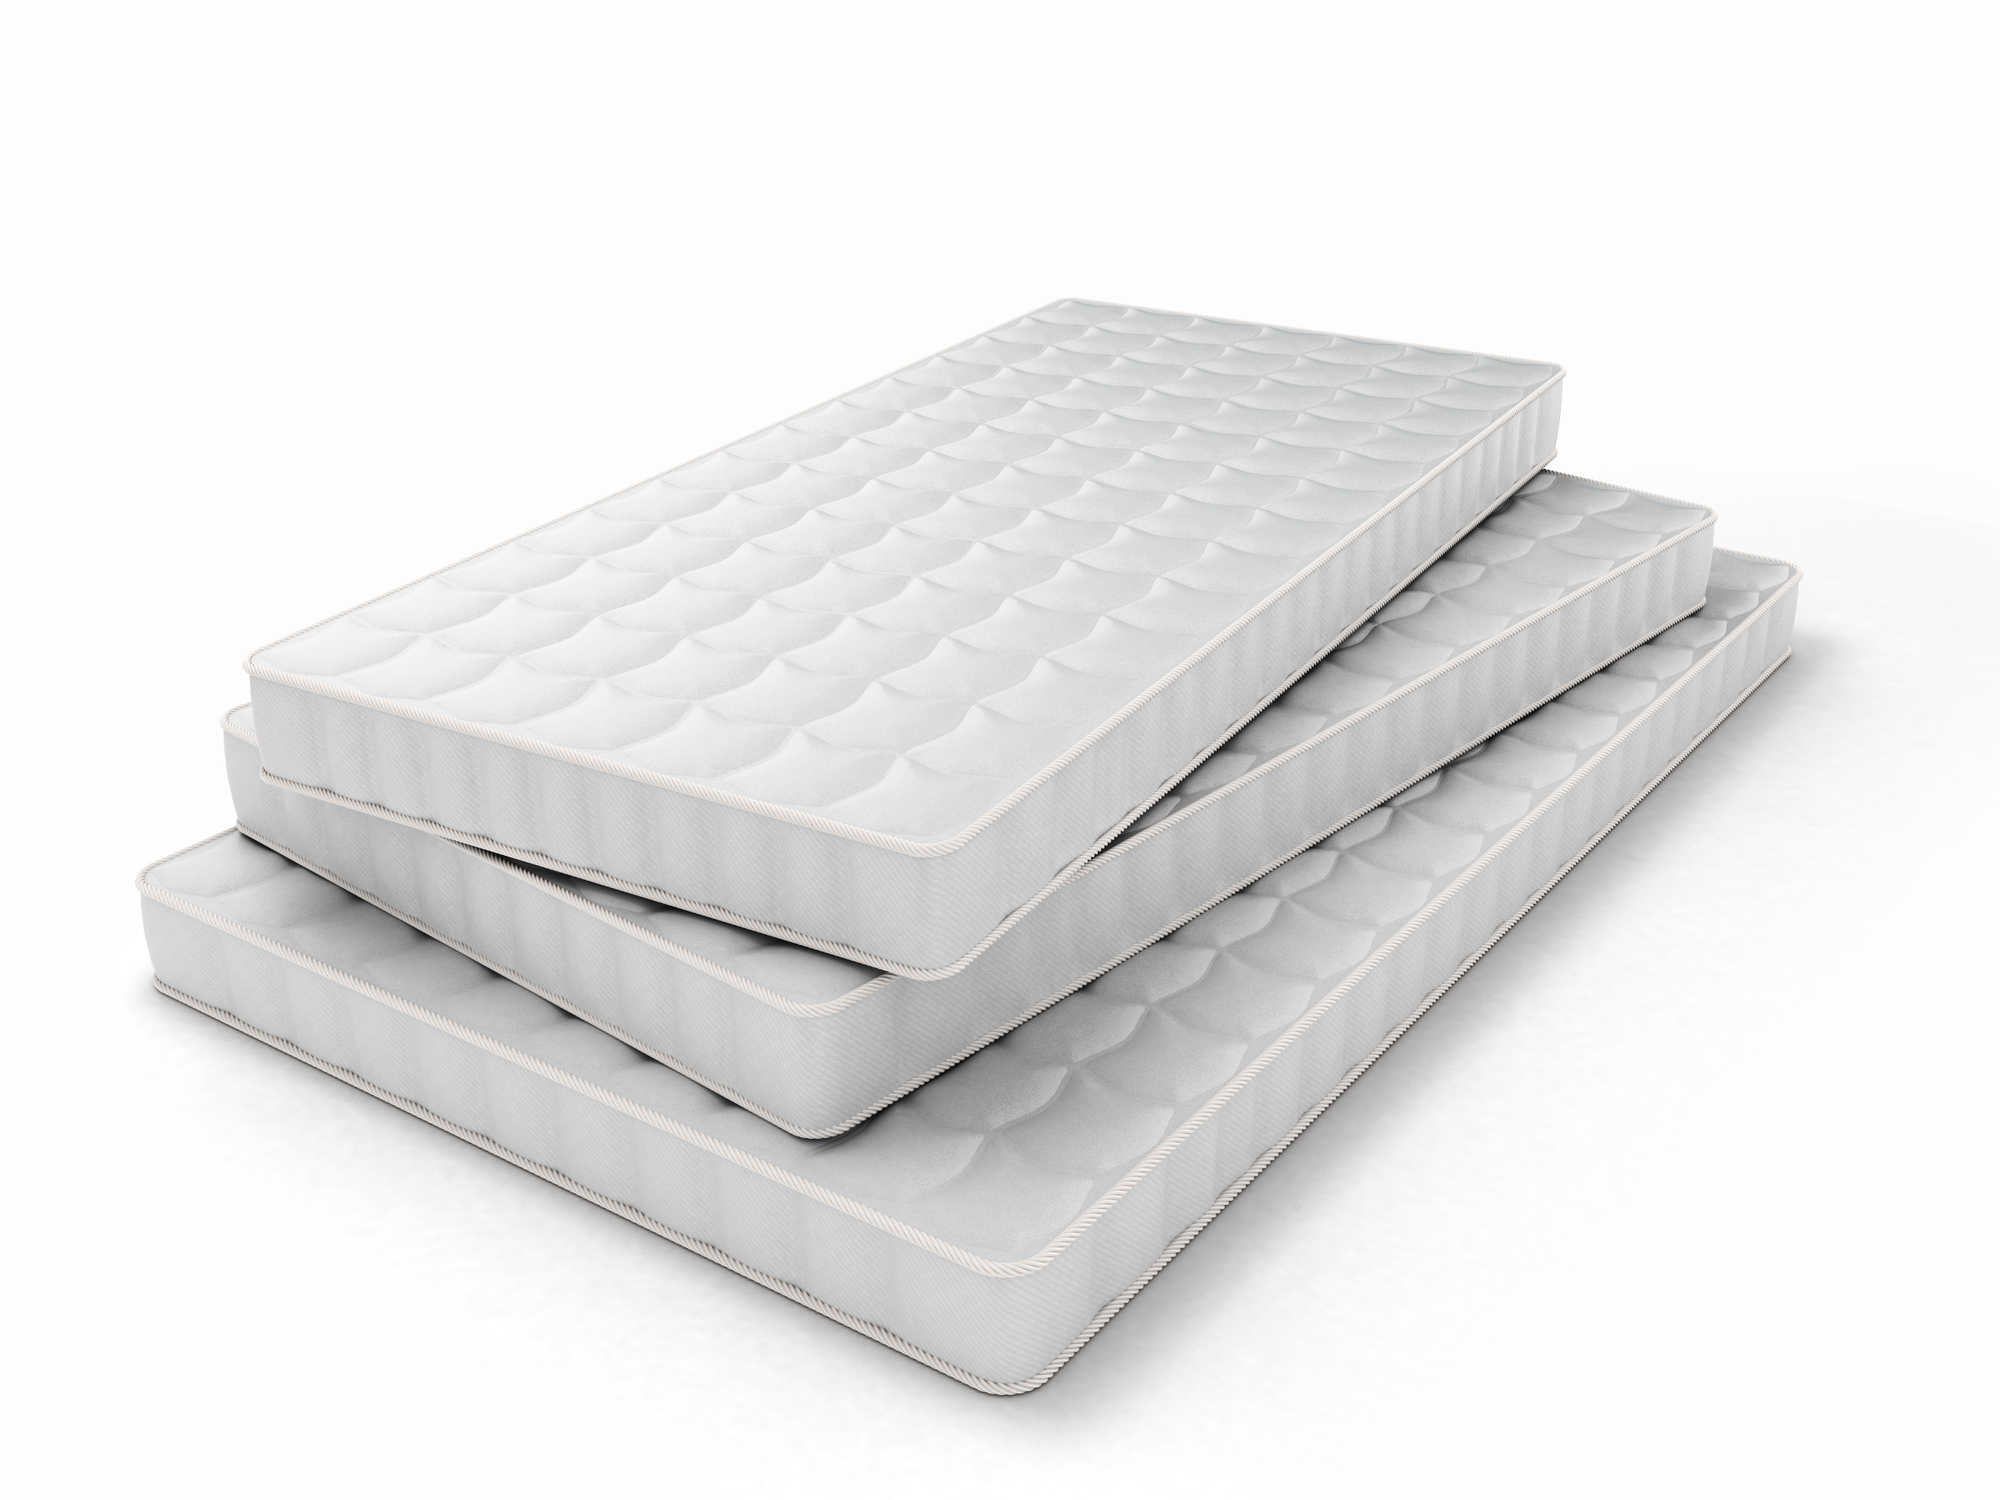 stack of mattresses in various sizes